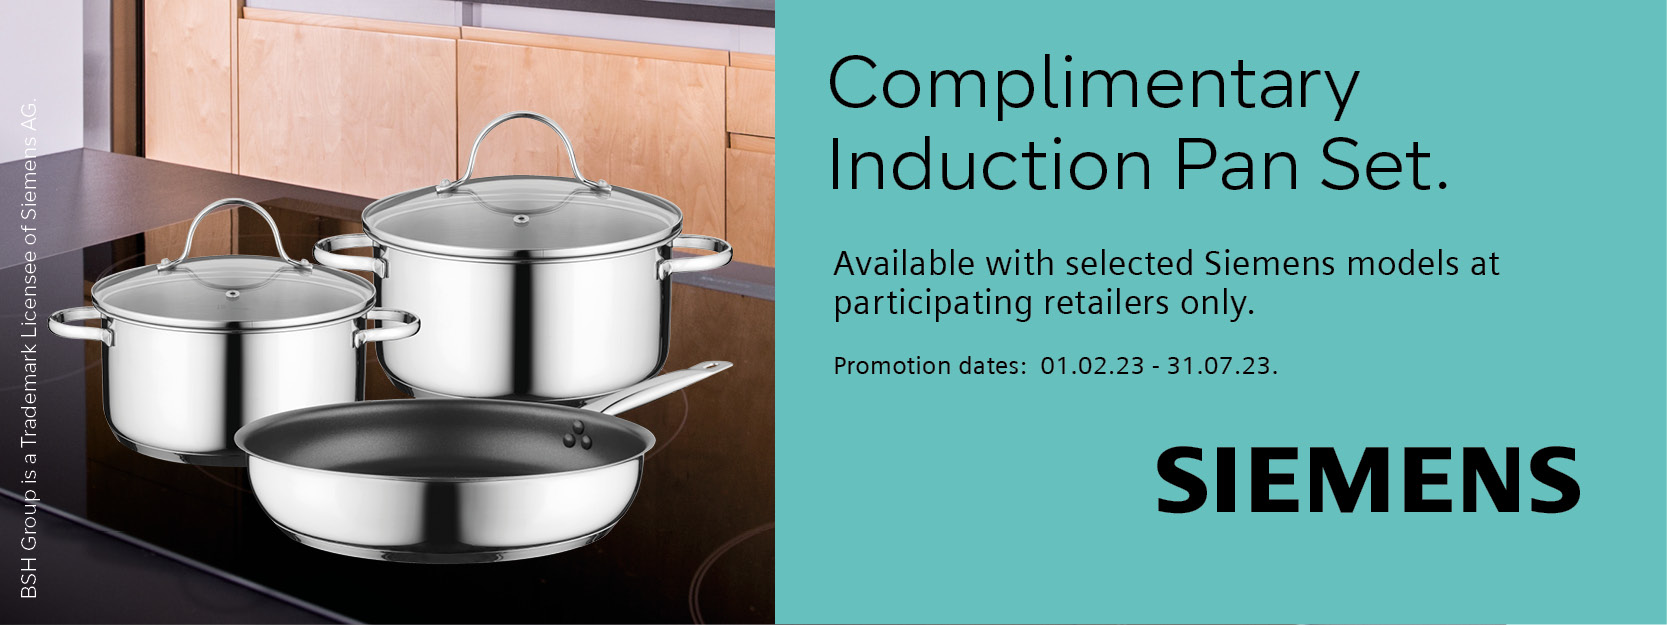 Siemens Complimentary Induction Pan set 31.07.23